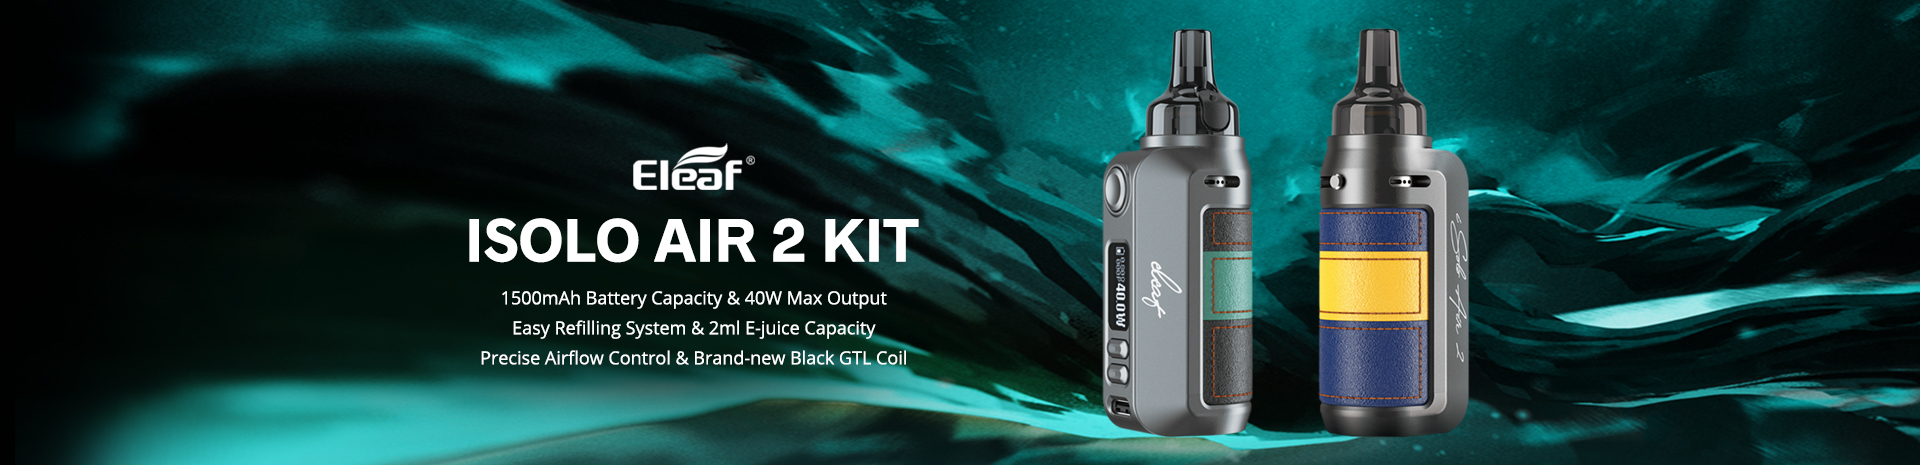 Eleaf iSolo Air 2 Kit Banner